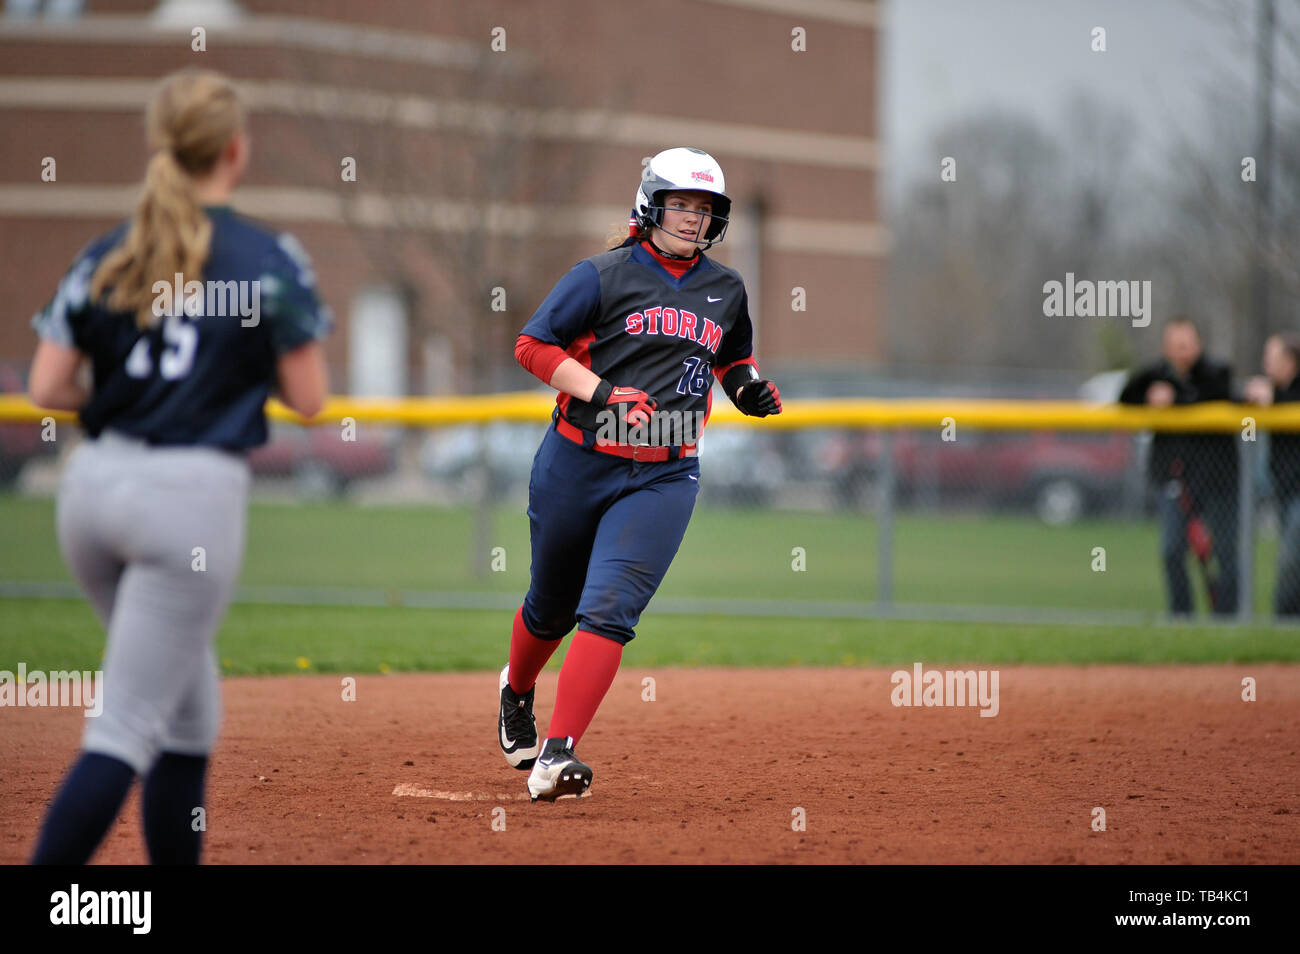 Batter rounding second base during her home run trot during a high school softball game. USA. Stock Photo